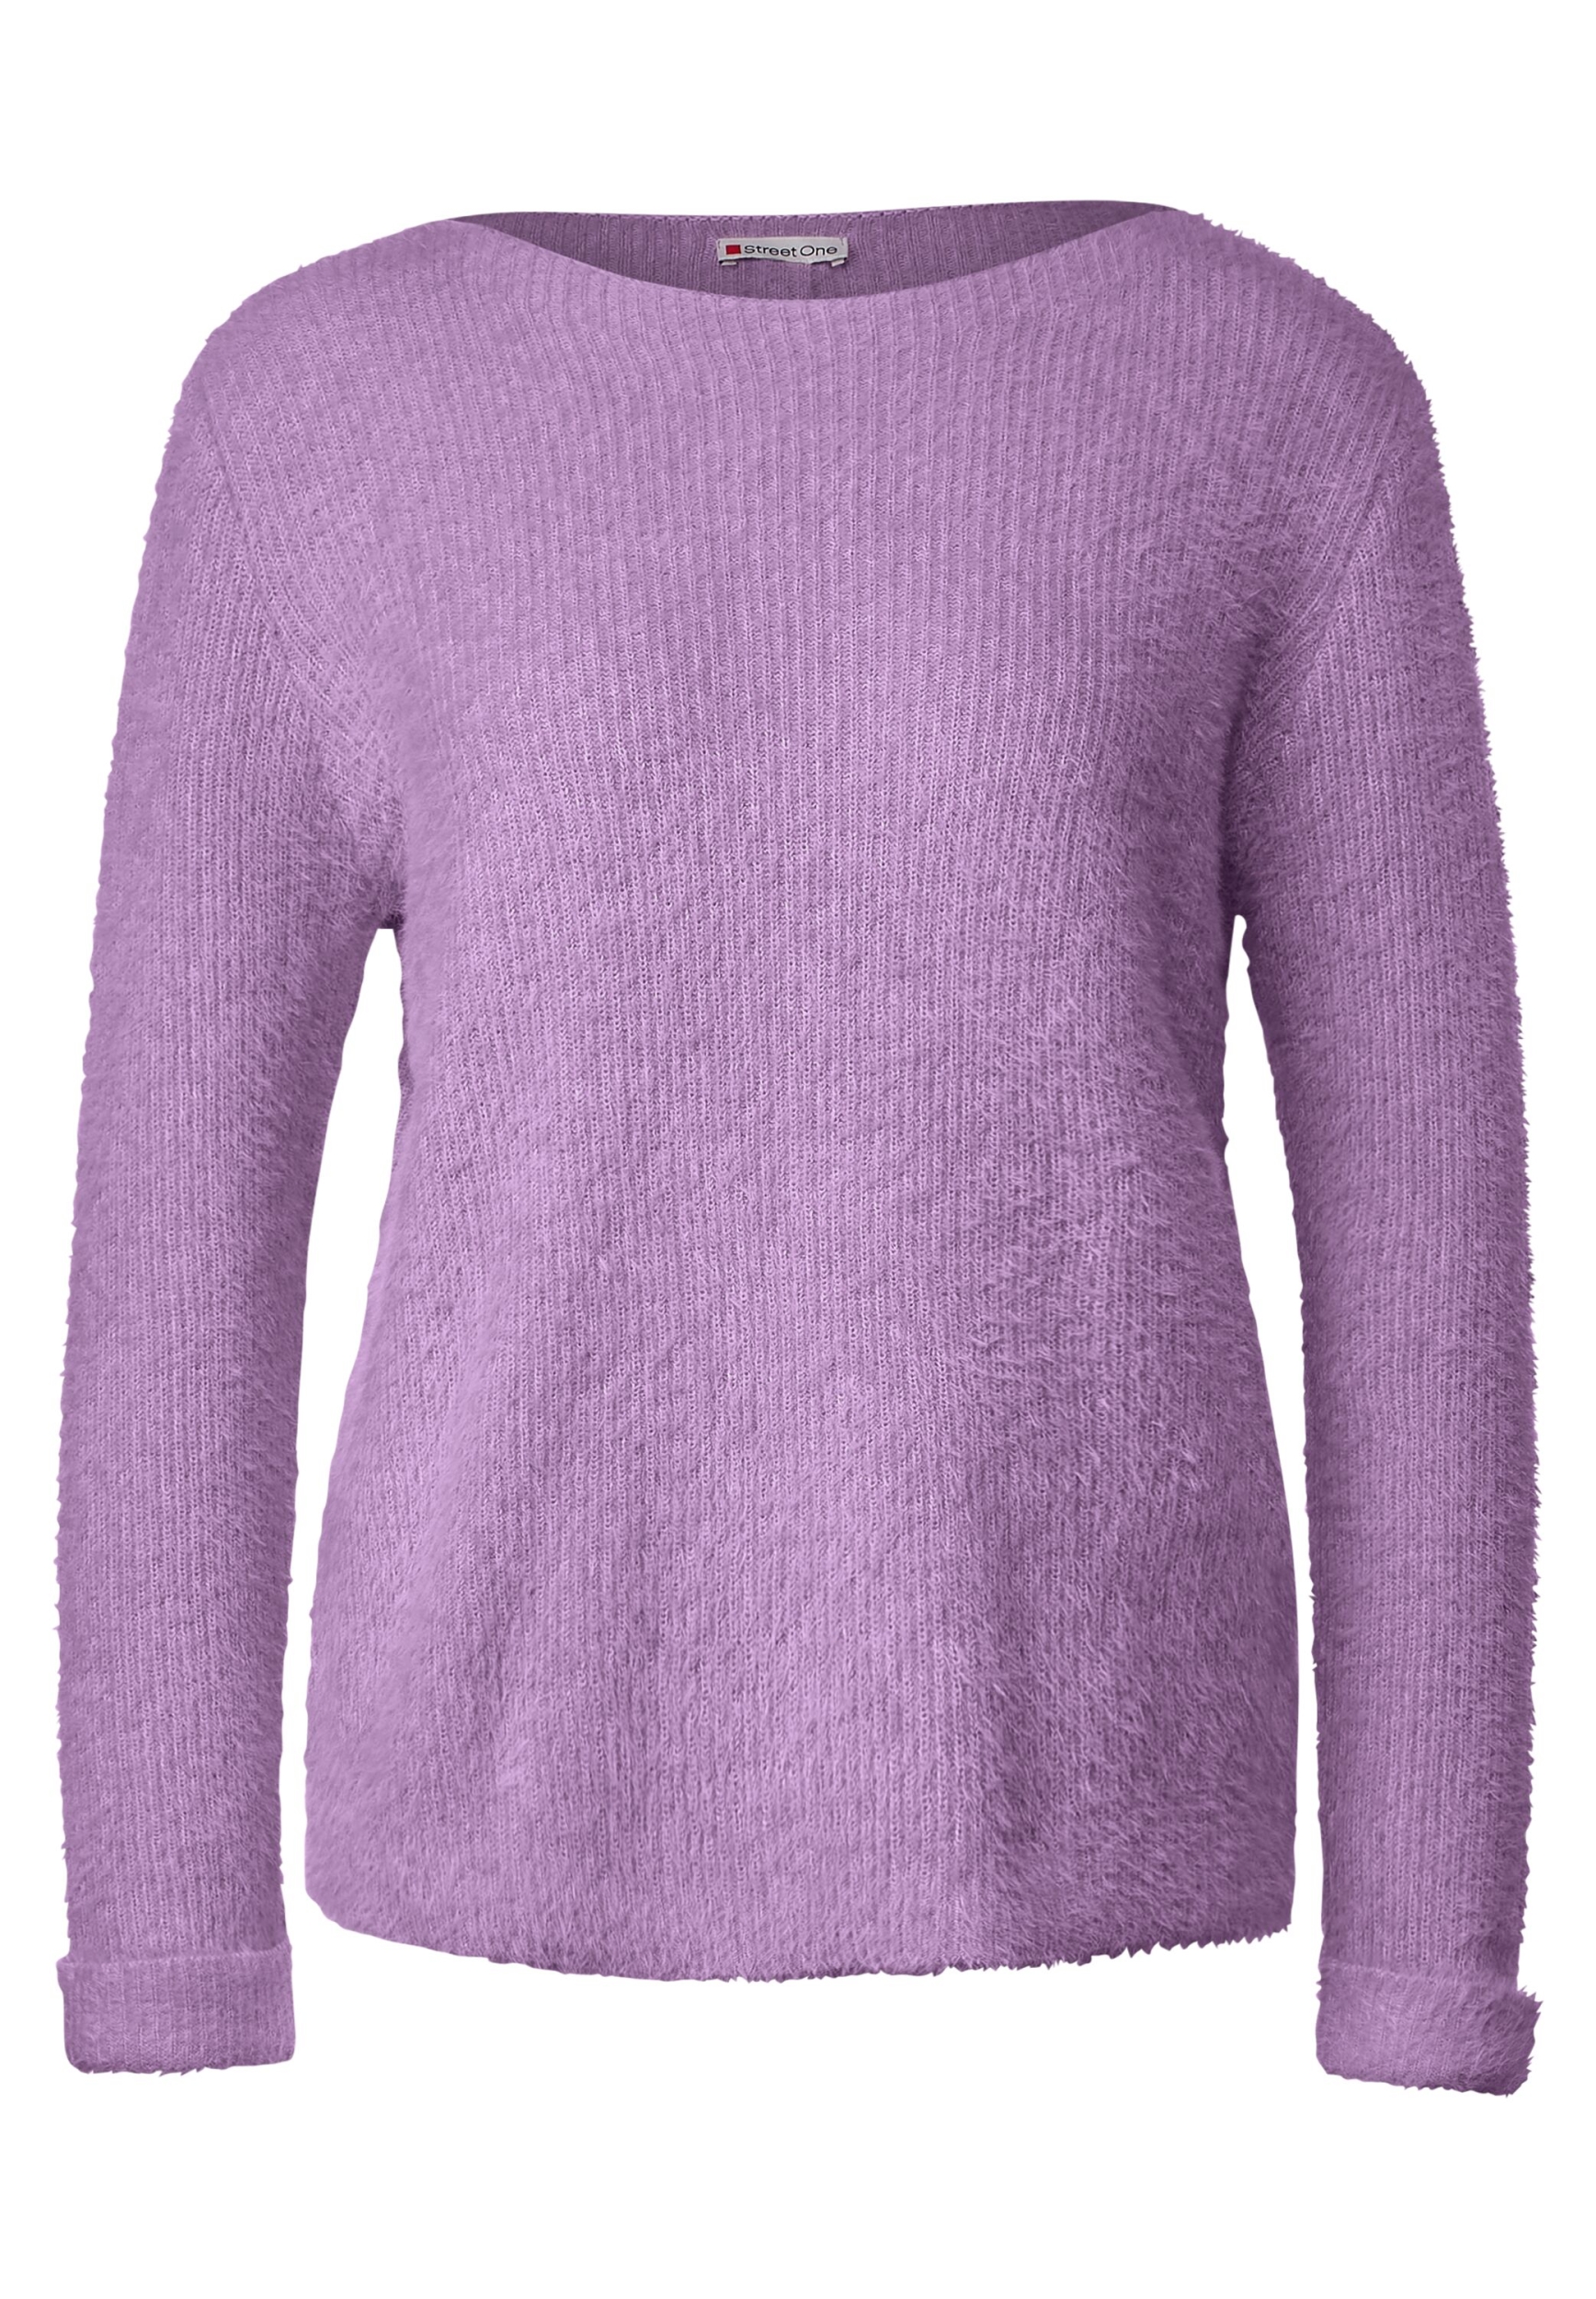 feather BF_sweater | soft yarn 46 | lilac | A302413-15289-46 pure